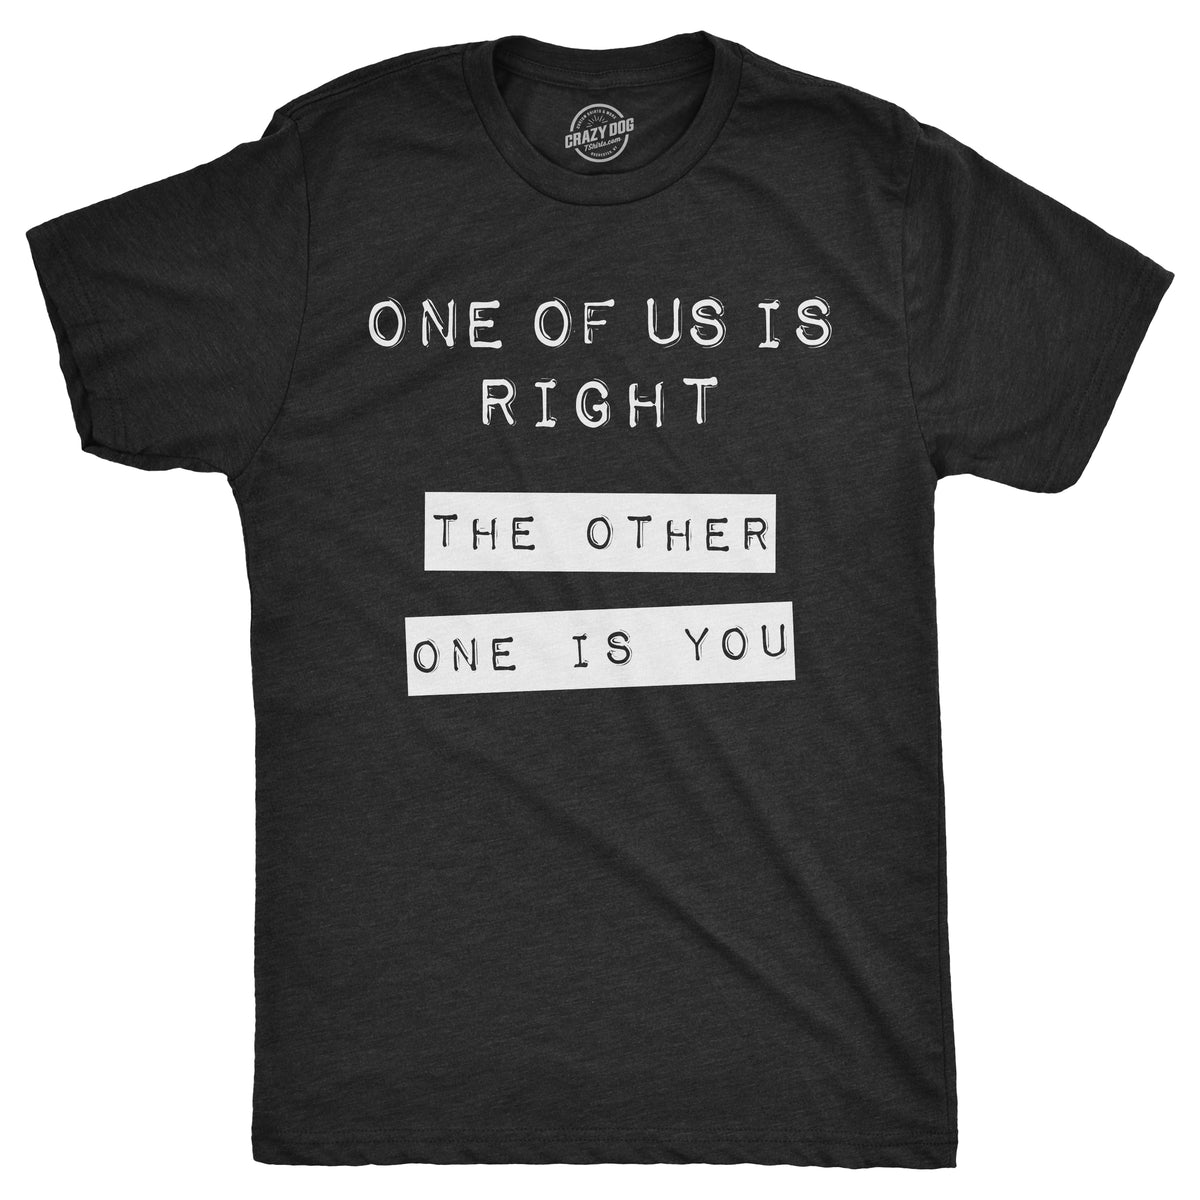 Funny Heather Black One Of Us Is Right. The Other One Is You. Mens T Shirt Nerdy Sarcastic Tee